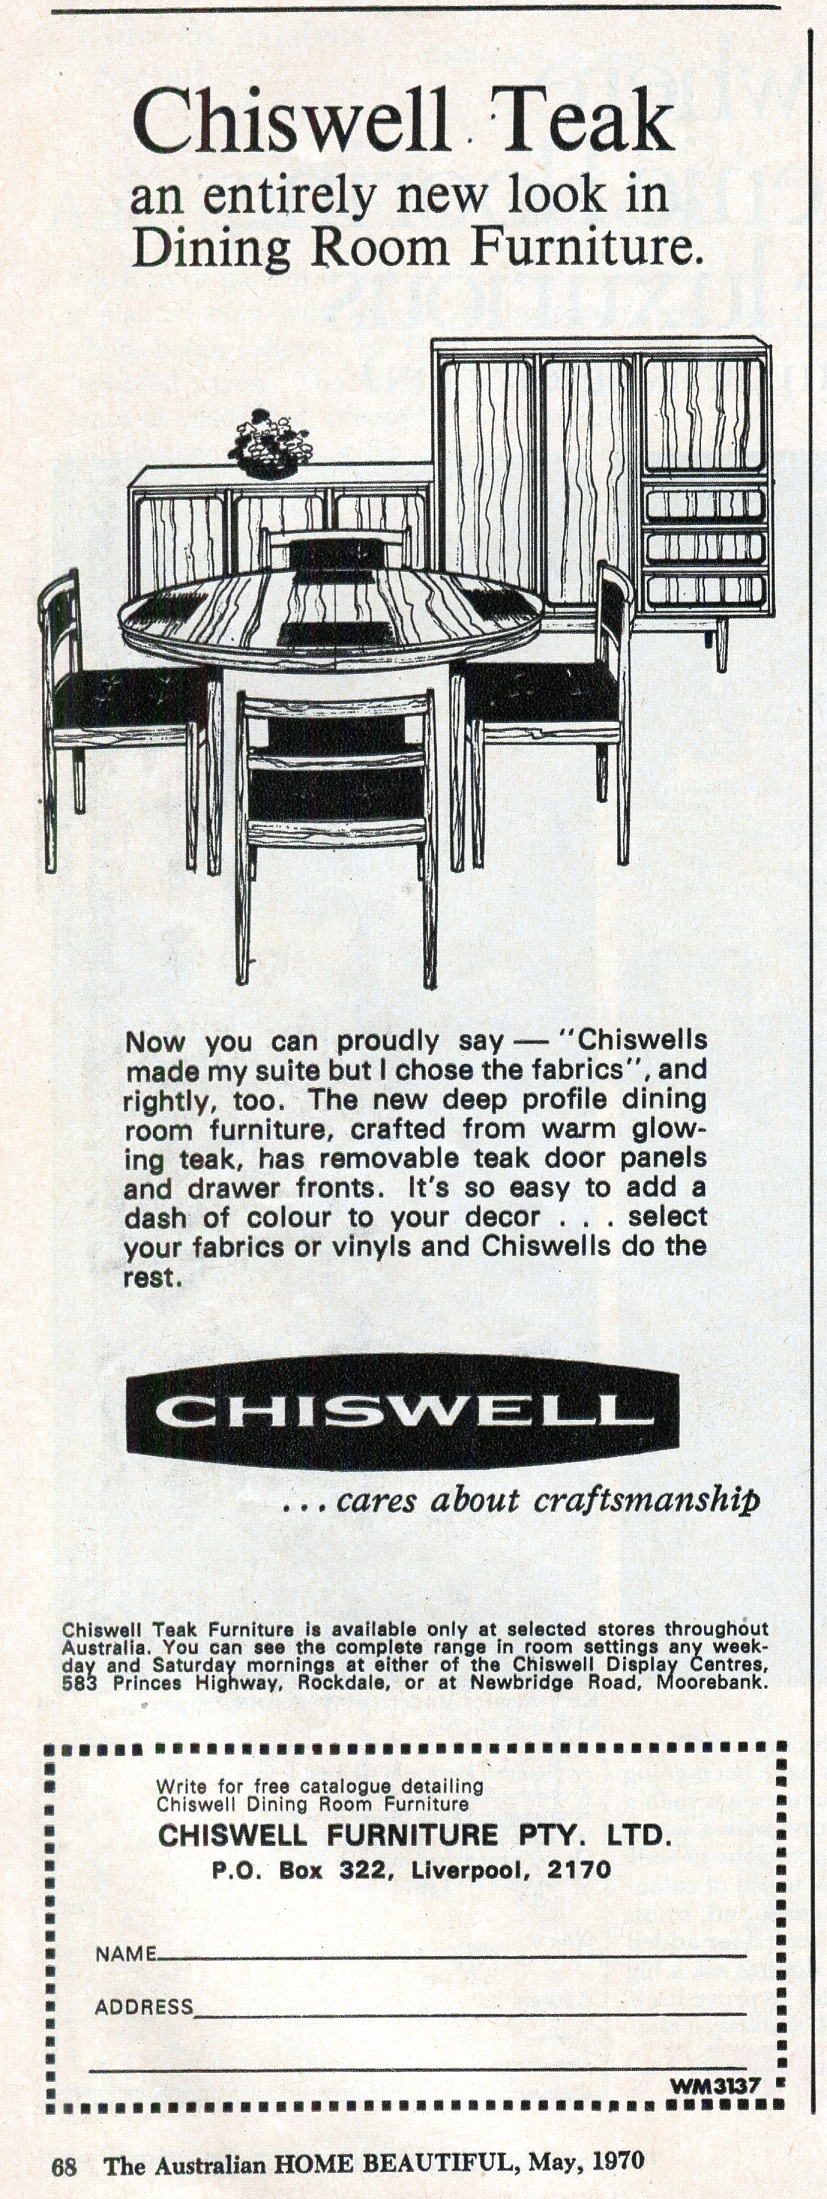 Chiswell company.jpg